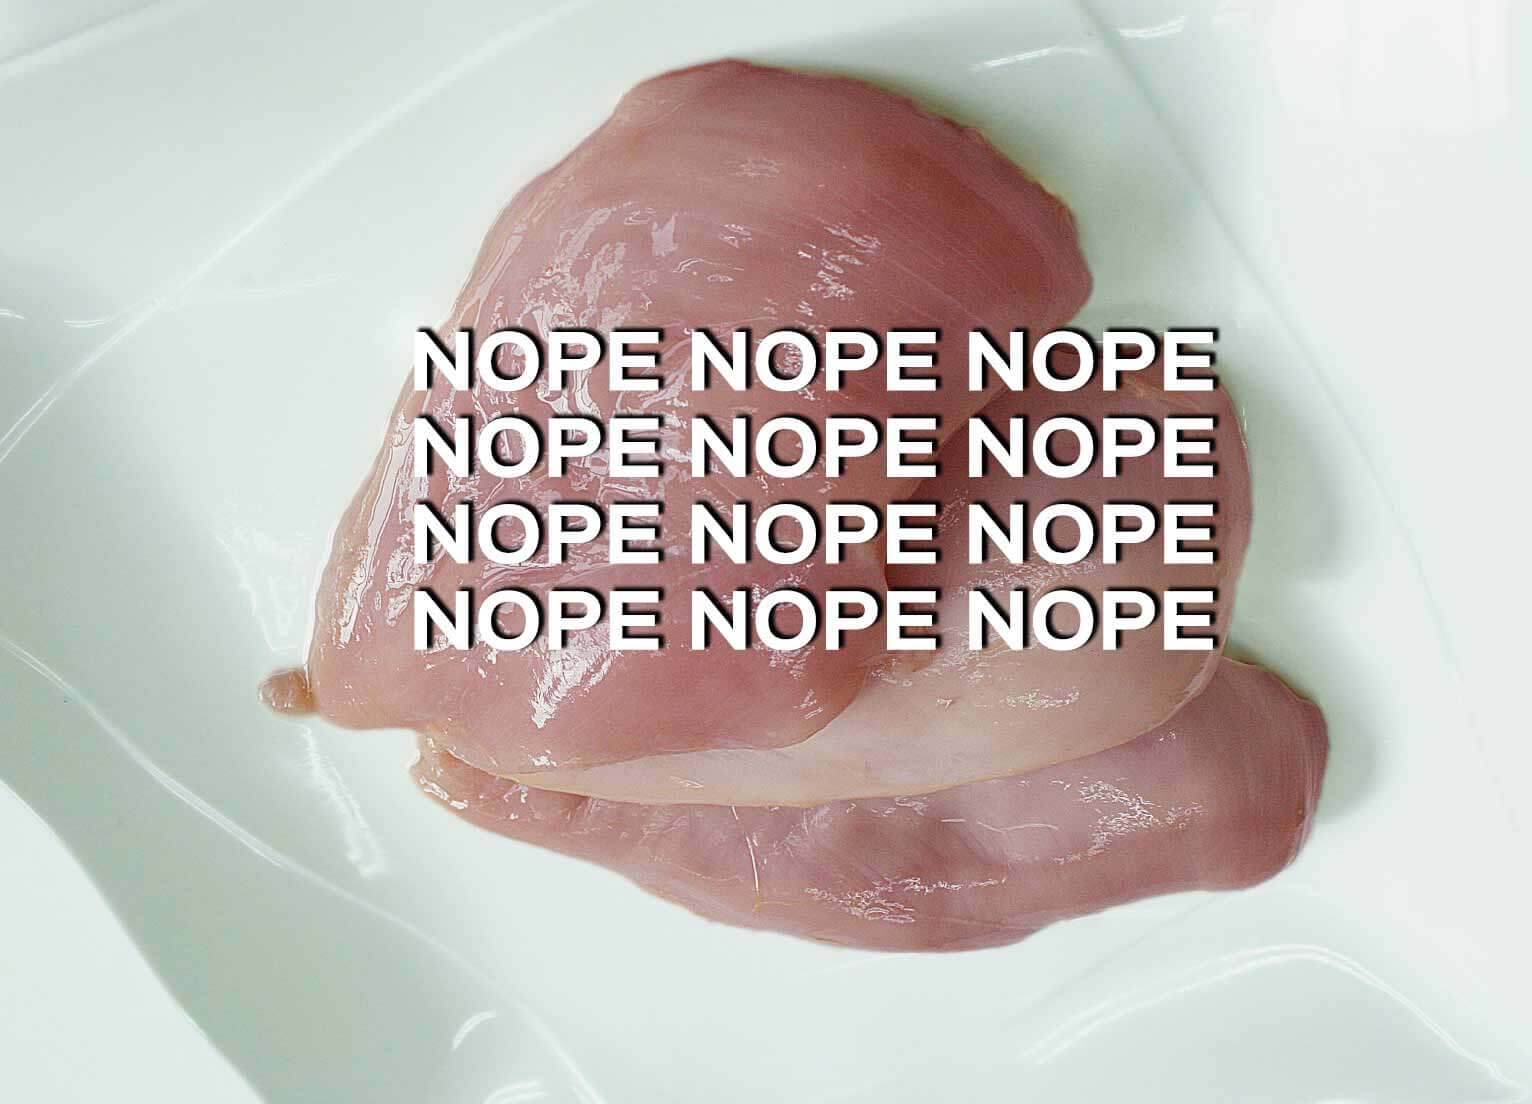 Found a Worm in Your Chicken Breast? You're Not Alone | PETA